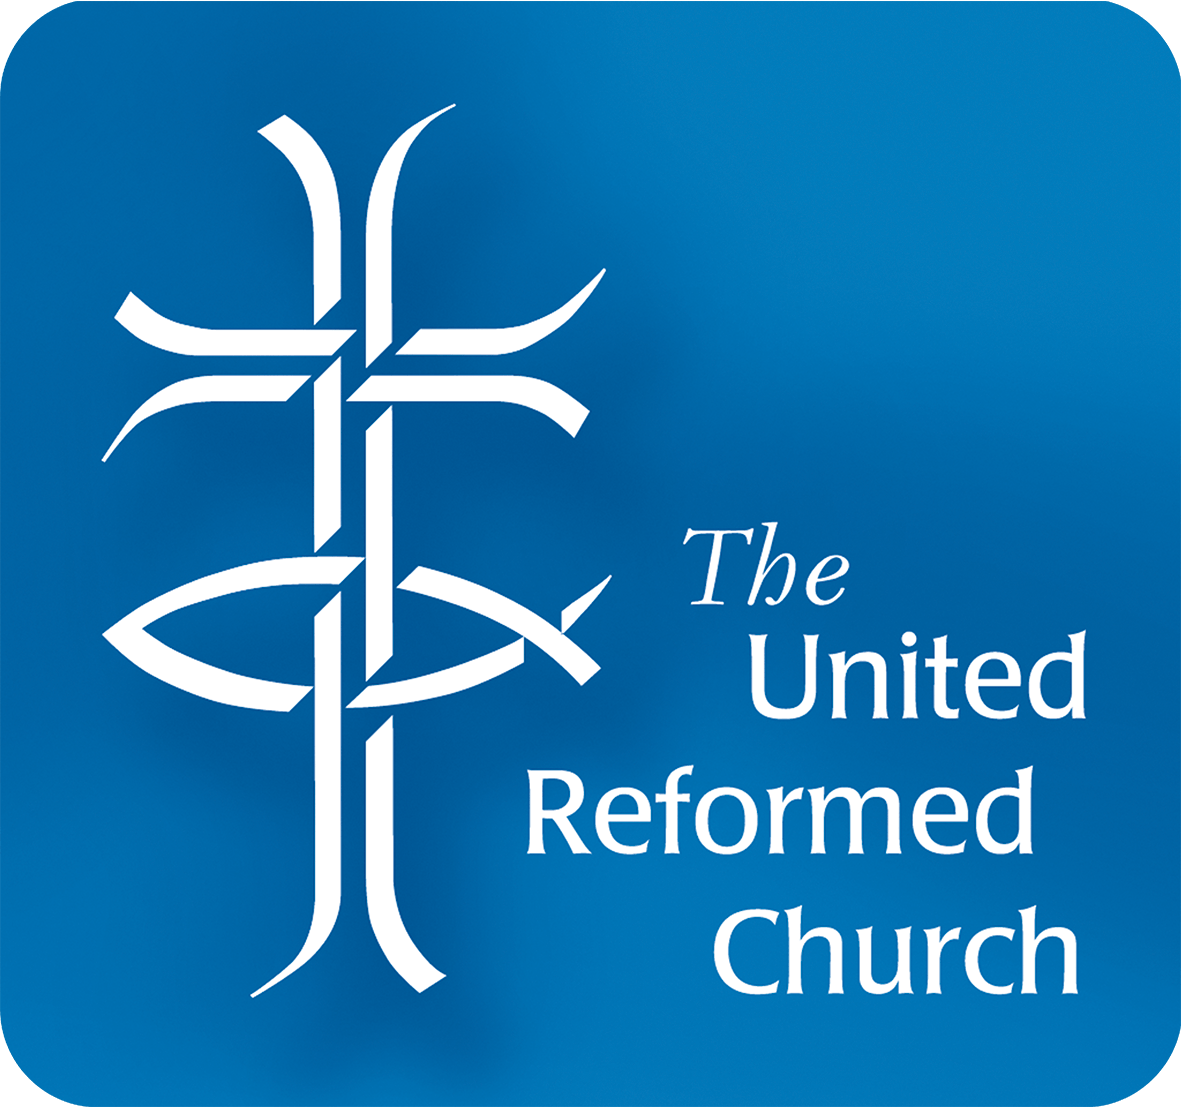 Reformed Logo - The United Reformed Church Synod of Scotland commits to divest